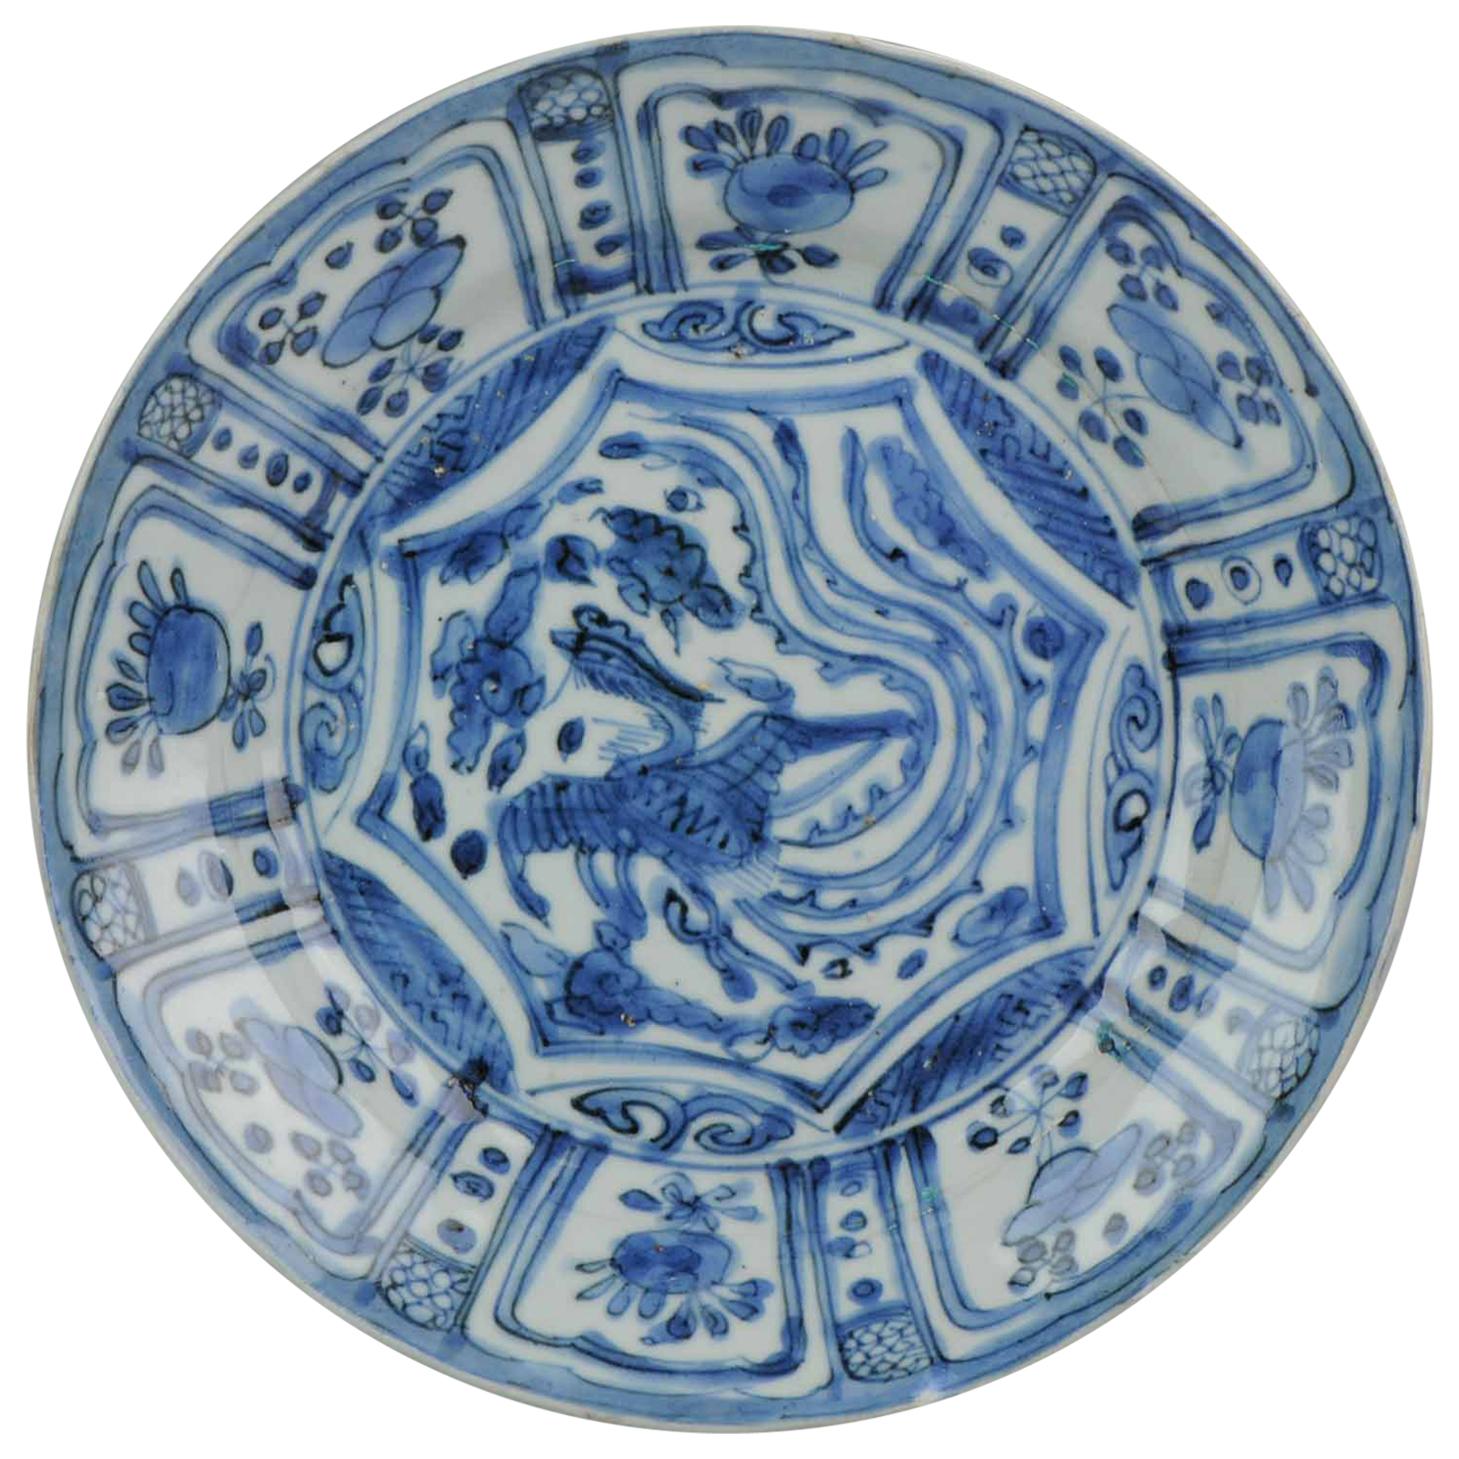 Antique Transitional Ming Chinese Porcelain Fenghuang Kraak Charger Flow